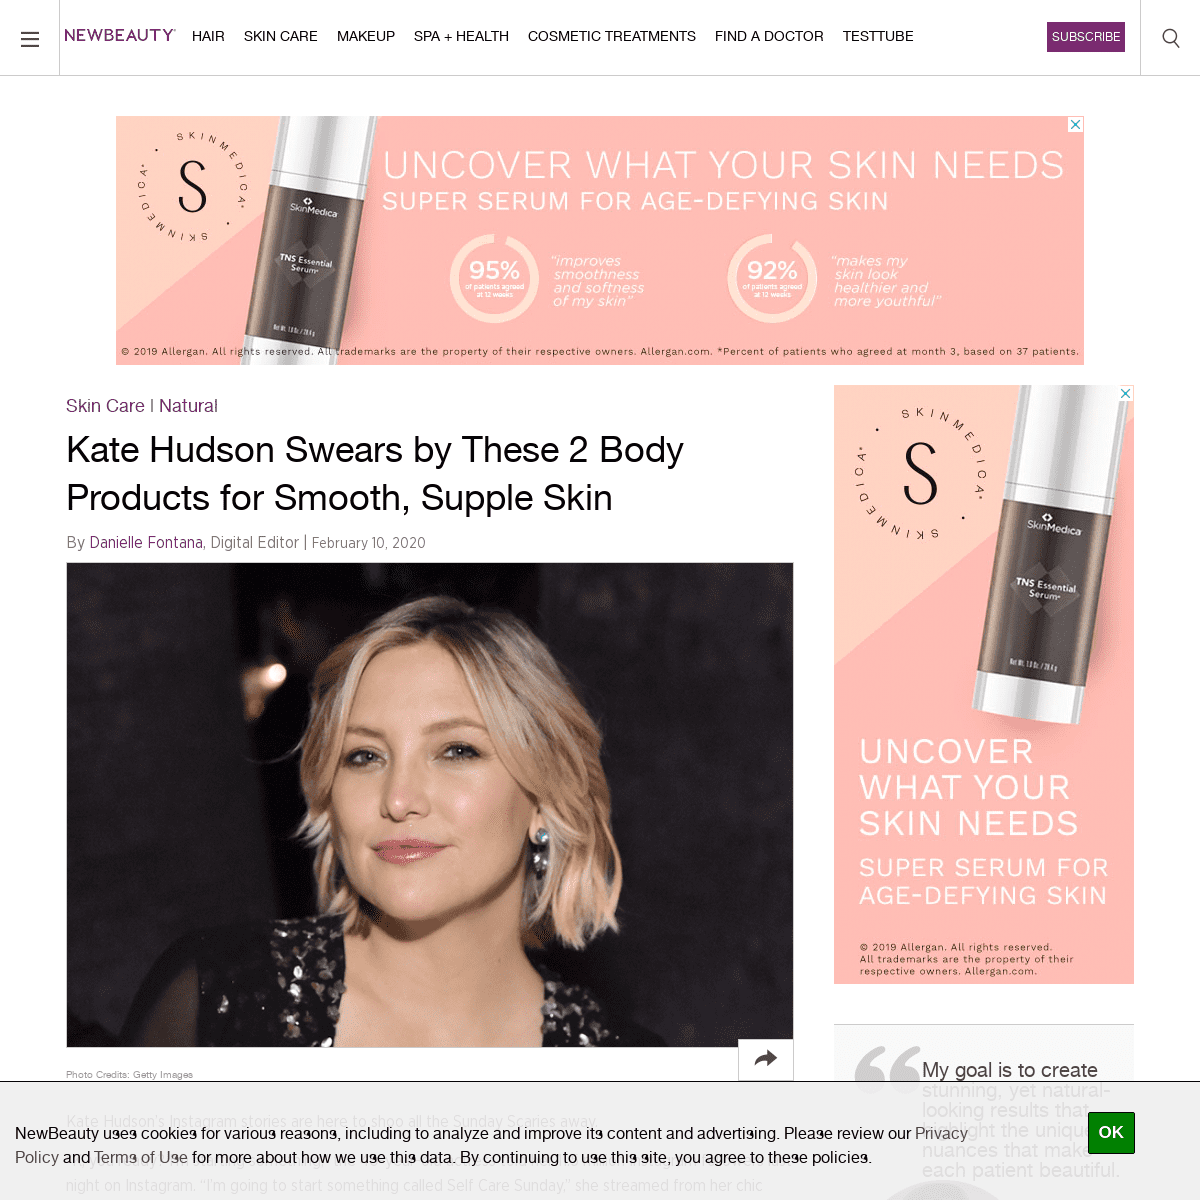 A complete backup of www.newbeauty.com/blog/dailybeauty/13146-kate-hudson-body-products/